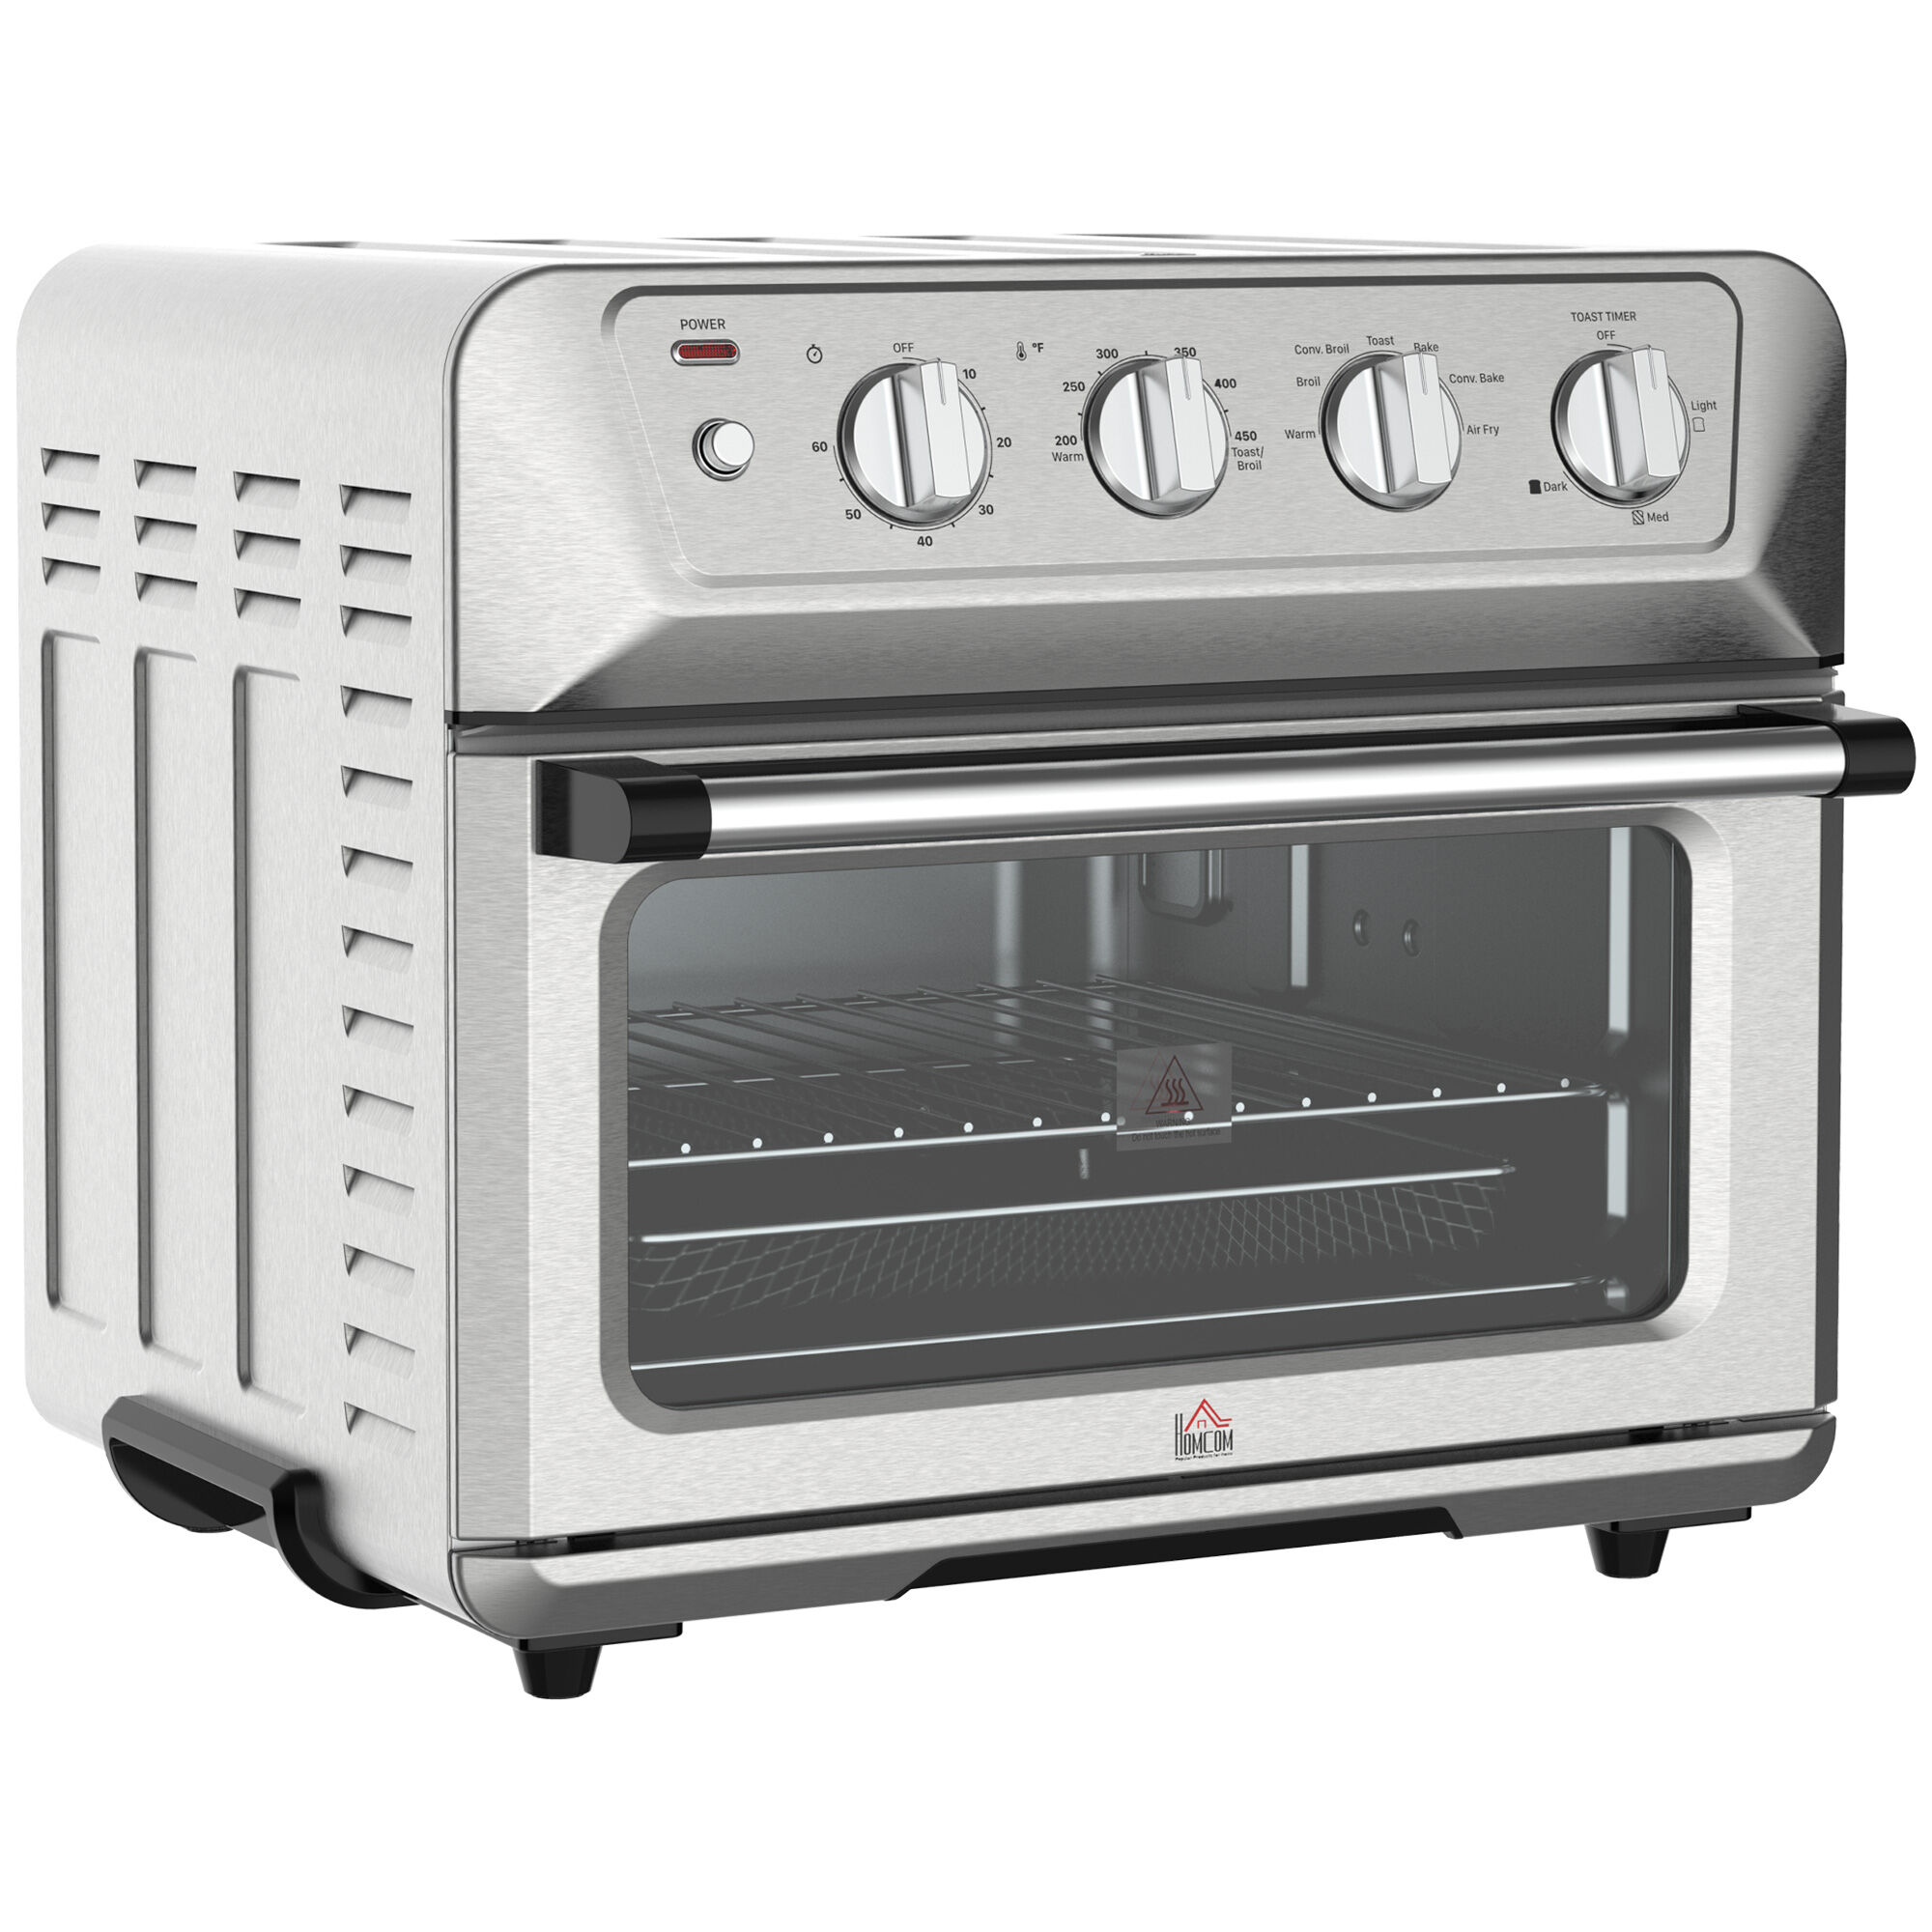 HOMCOM Convection Oven 21QT 7-In-1 Air Fryer Toaster Oven with Warm Broil Toast Bake Air Fry 1800W Stainless Steel Finish   Aosom.com